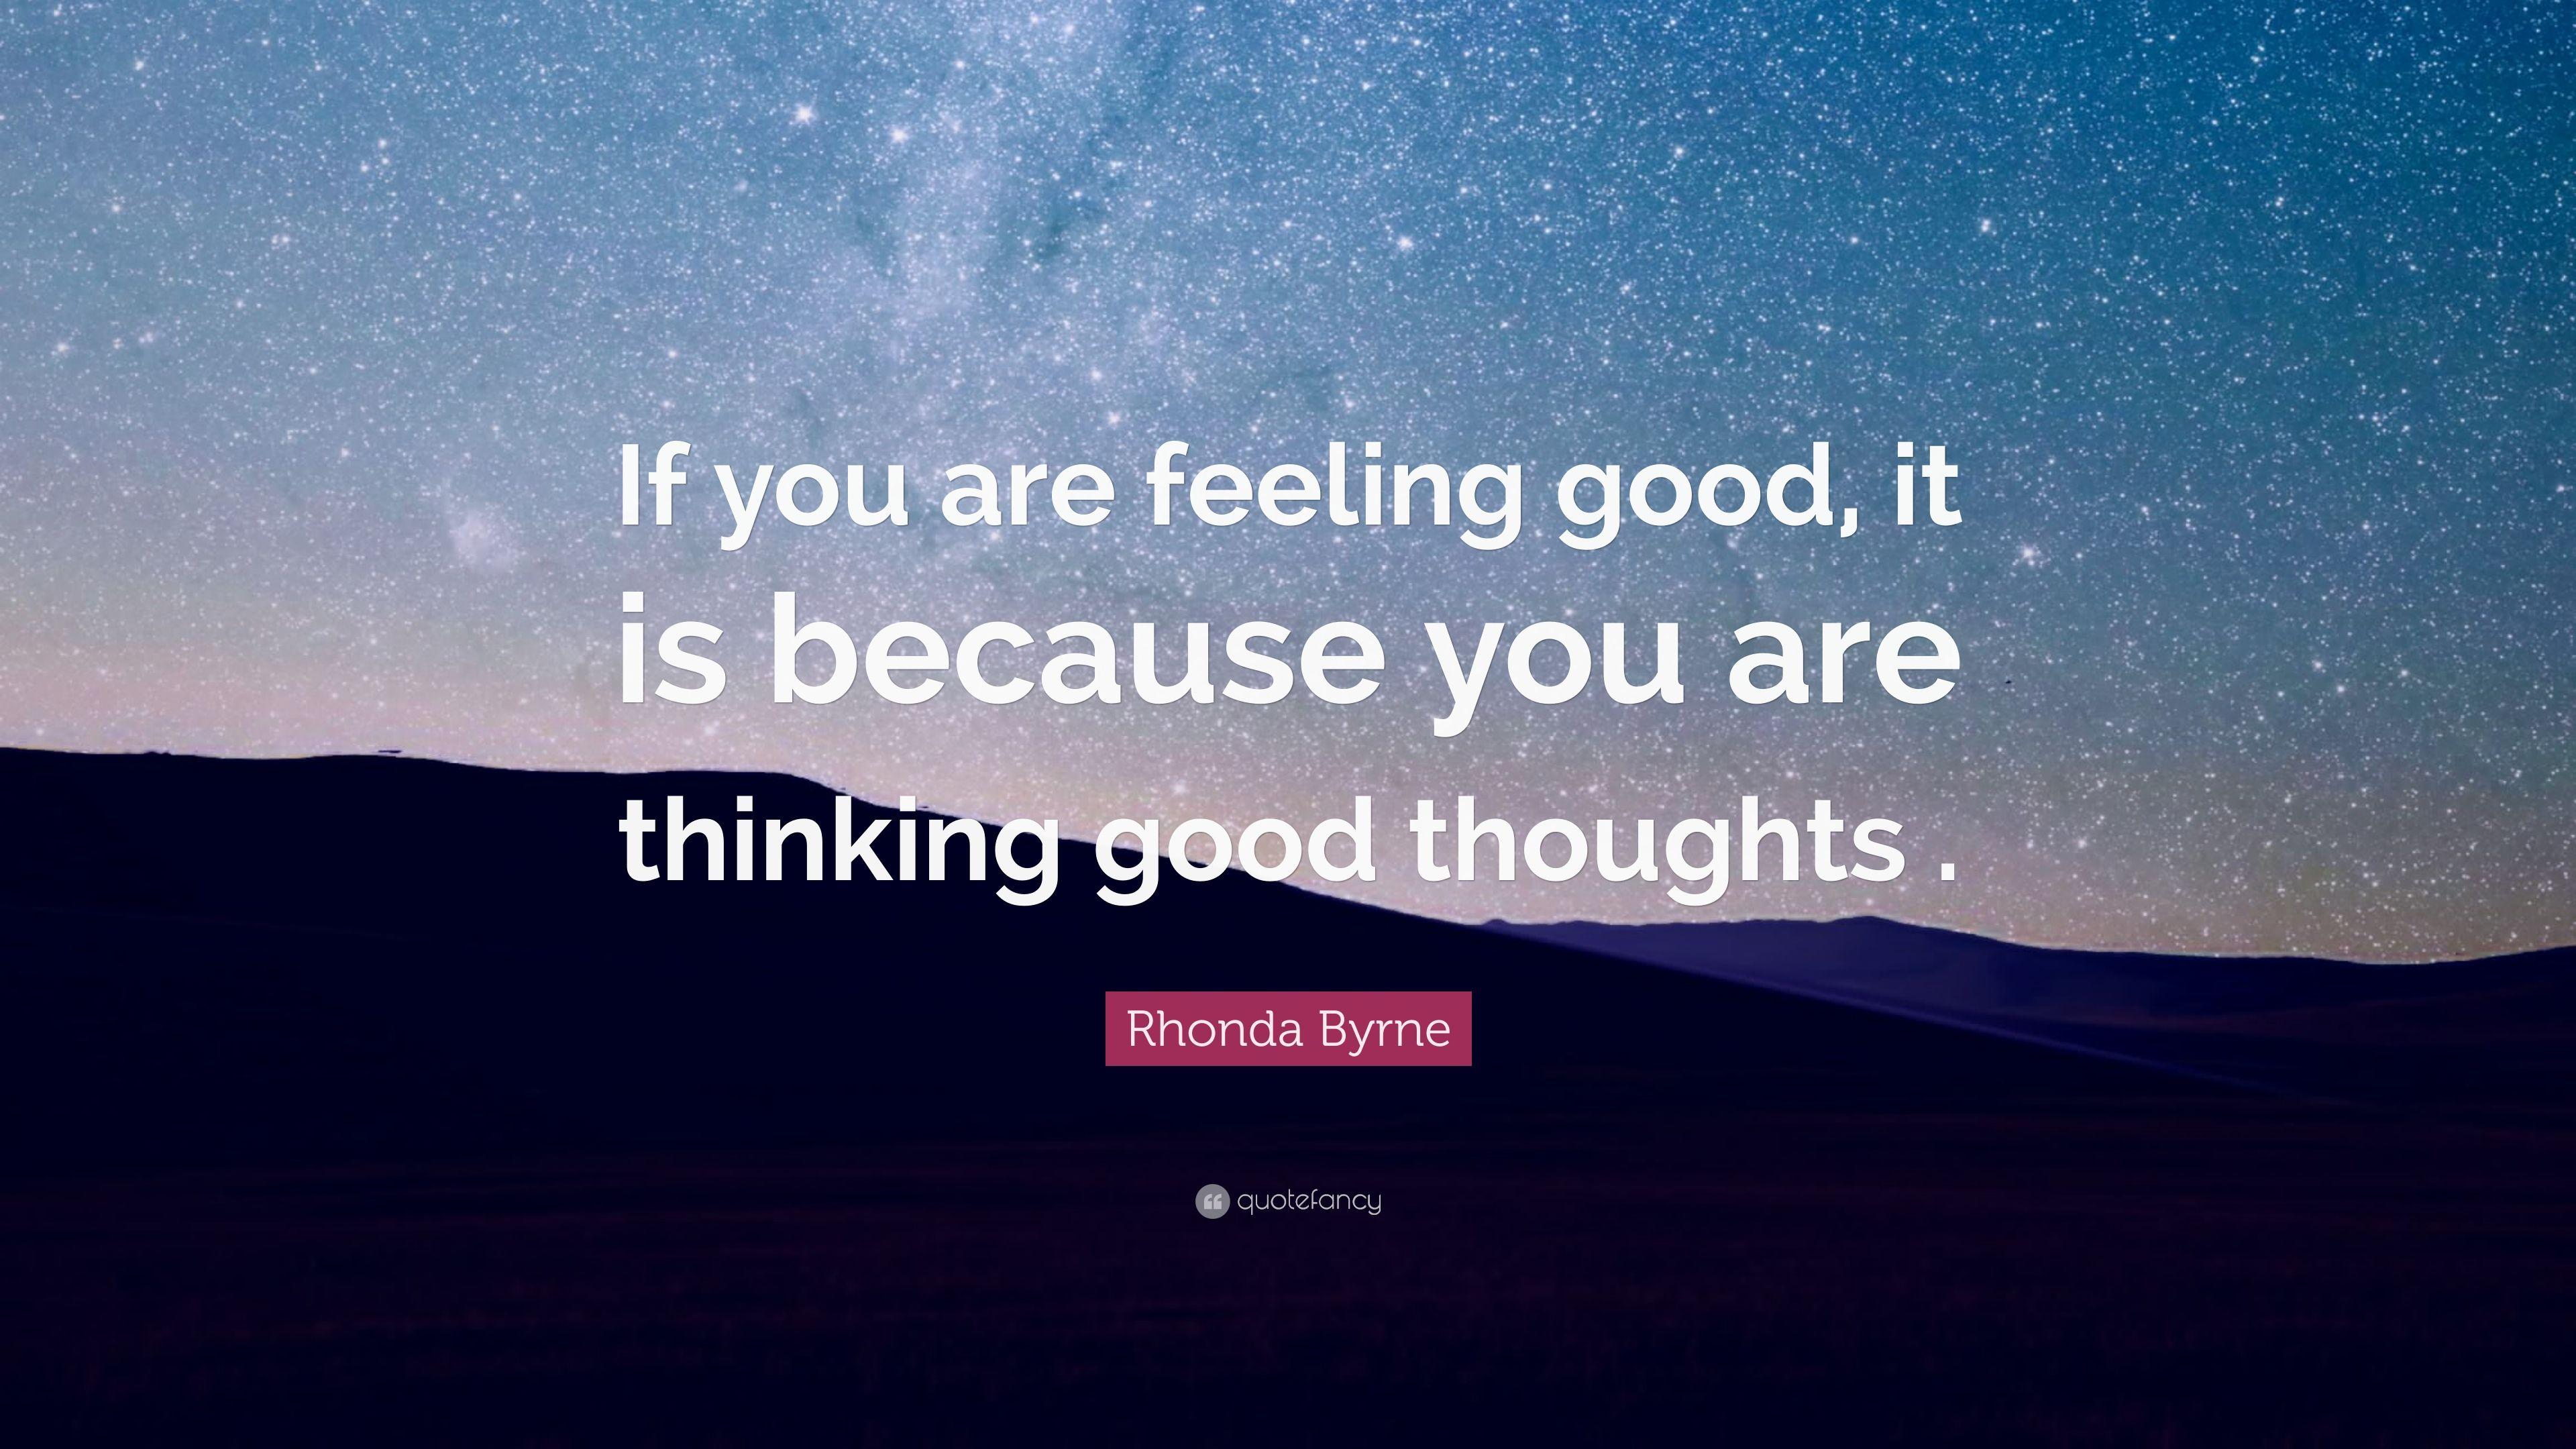 Rhonda Byrne Quote: “If you are feeling good, it is because you are